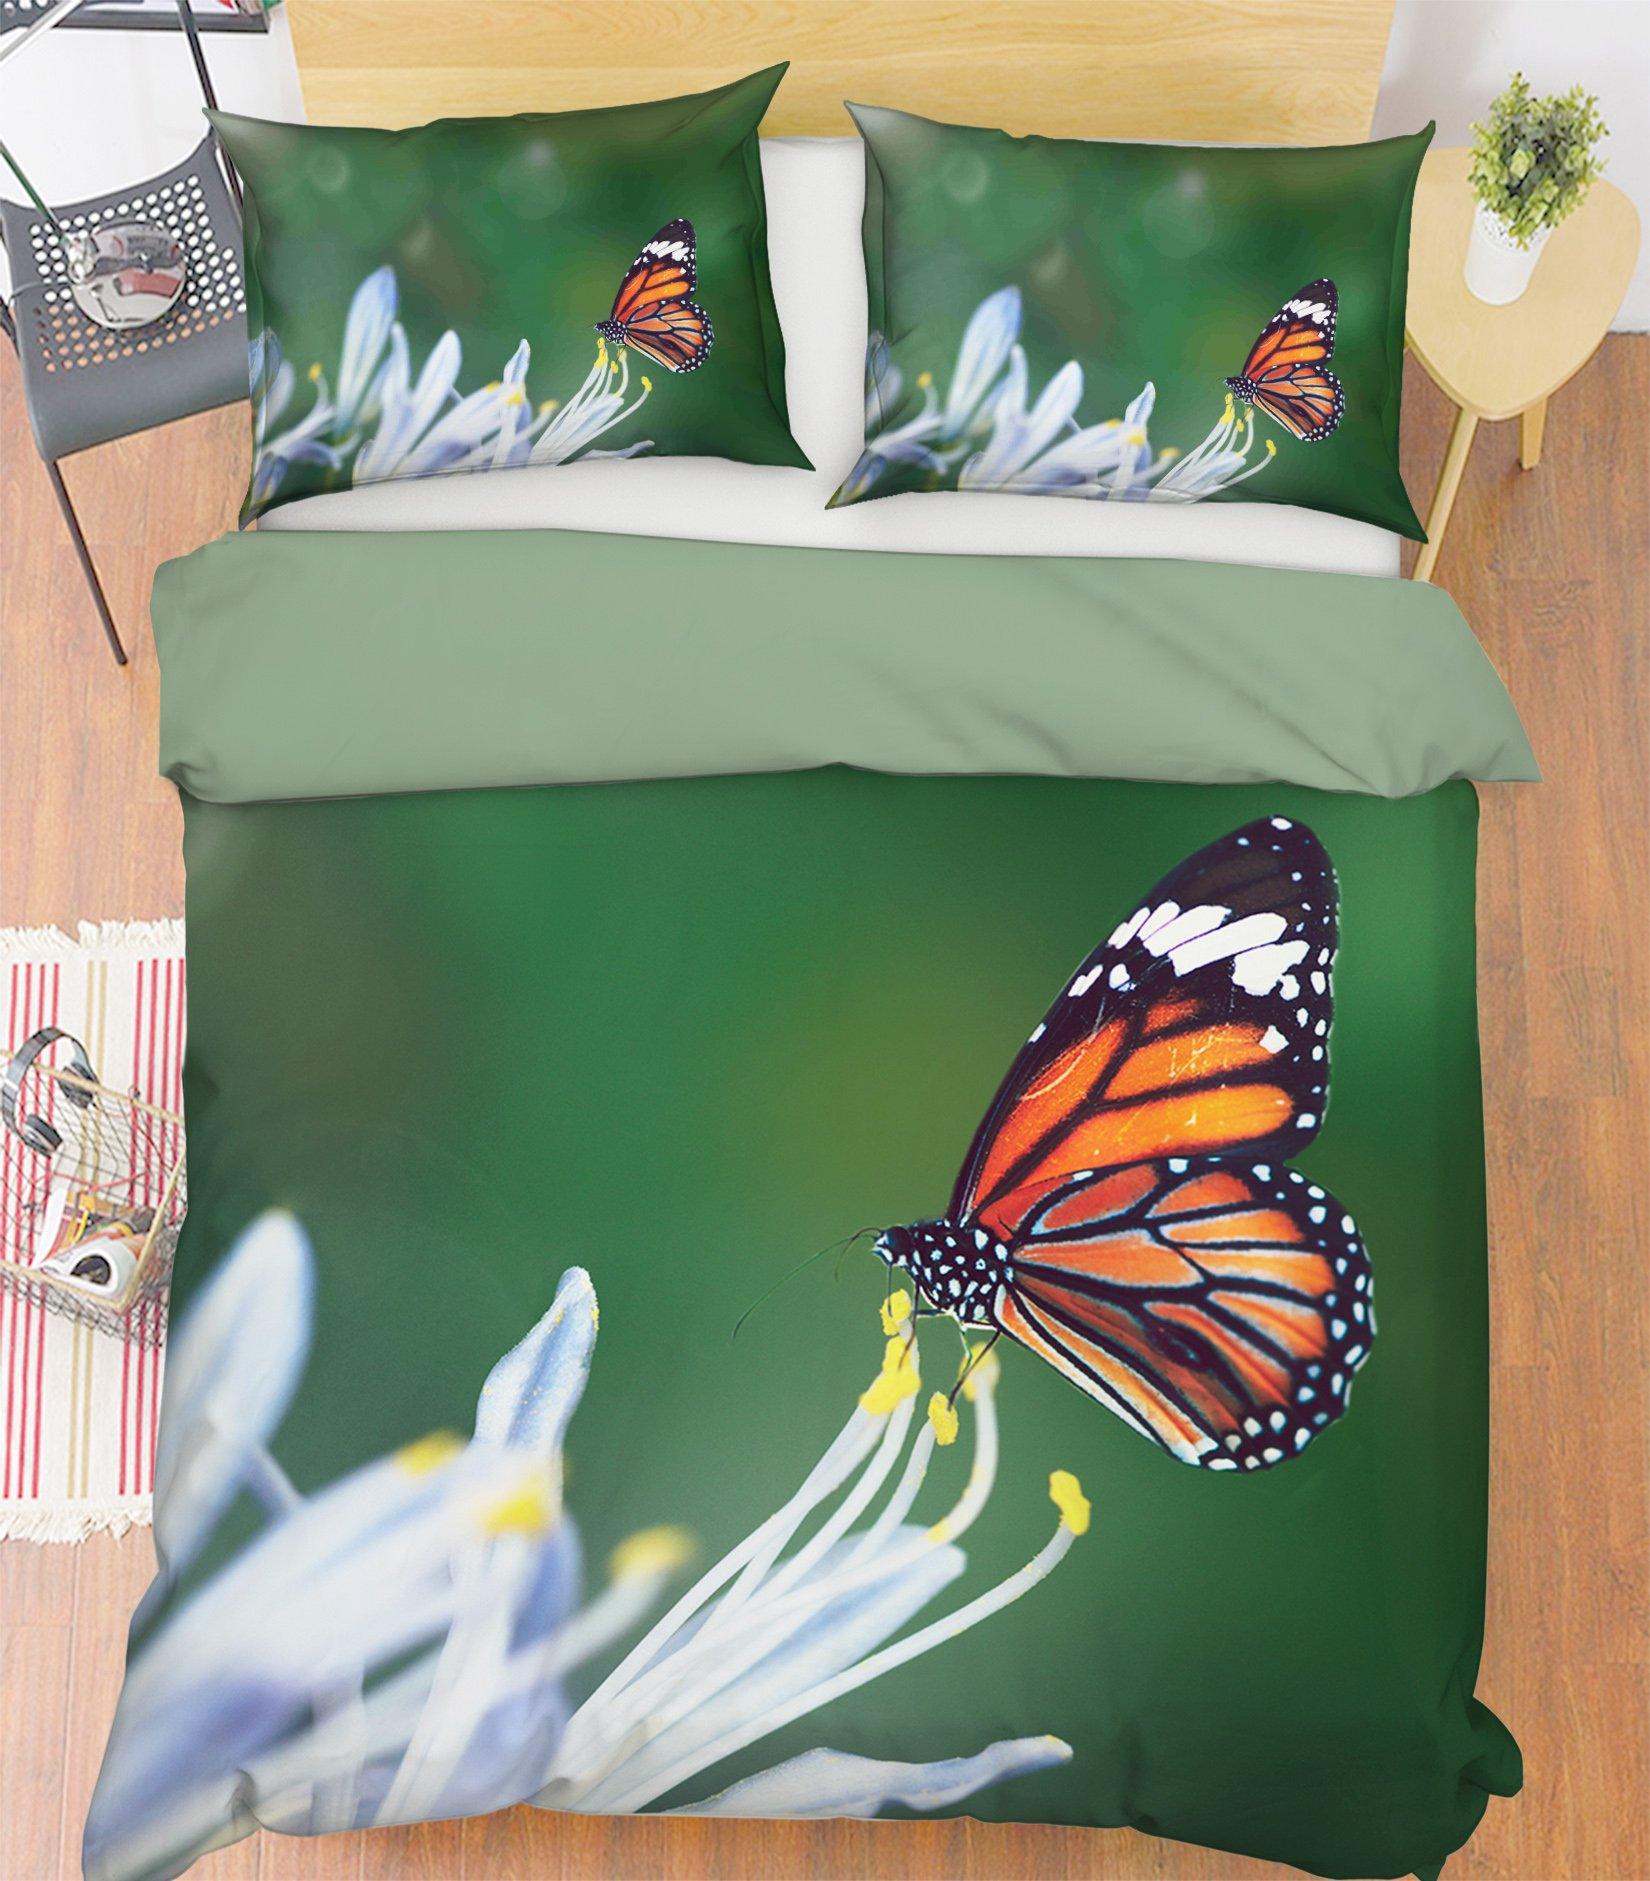 3D Flower Butterfly 1949 Bed Pillowcases Quilt Quiet Covers AJ Creativity Home 